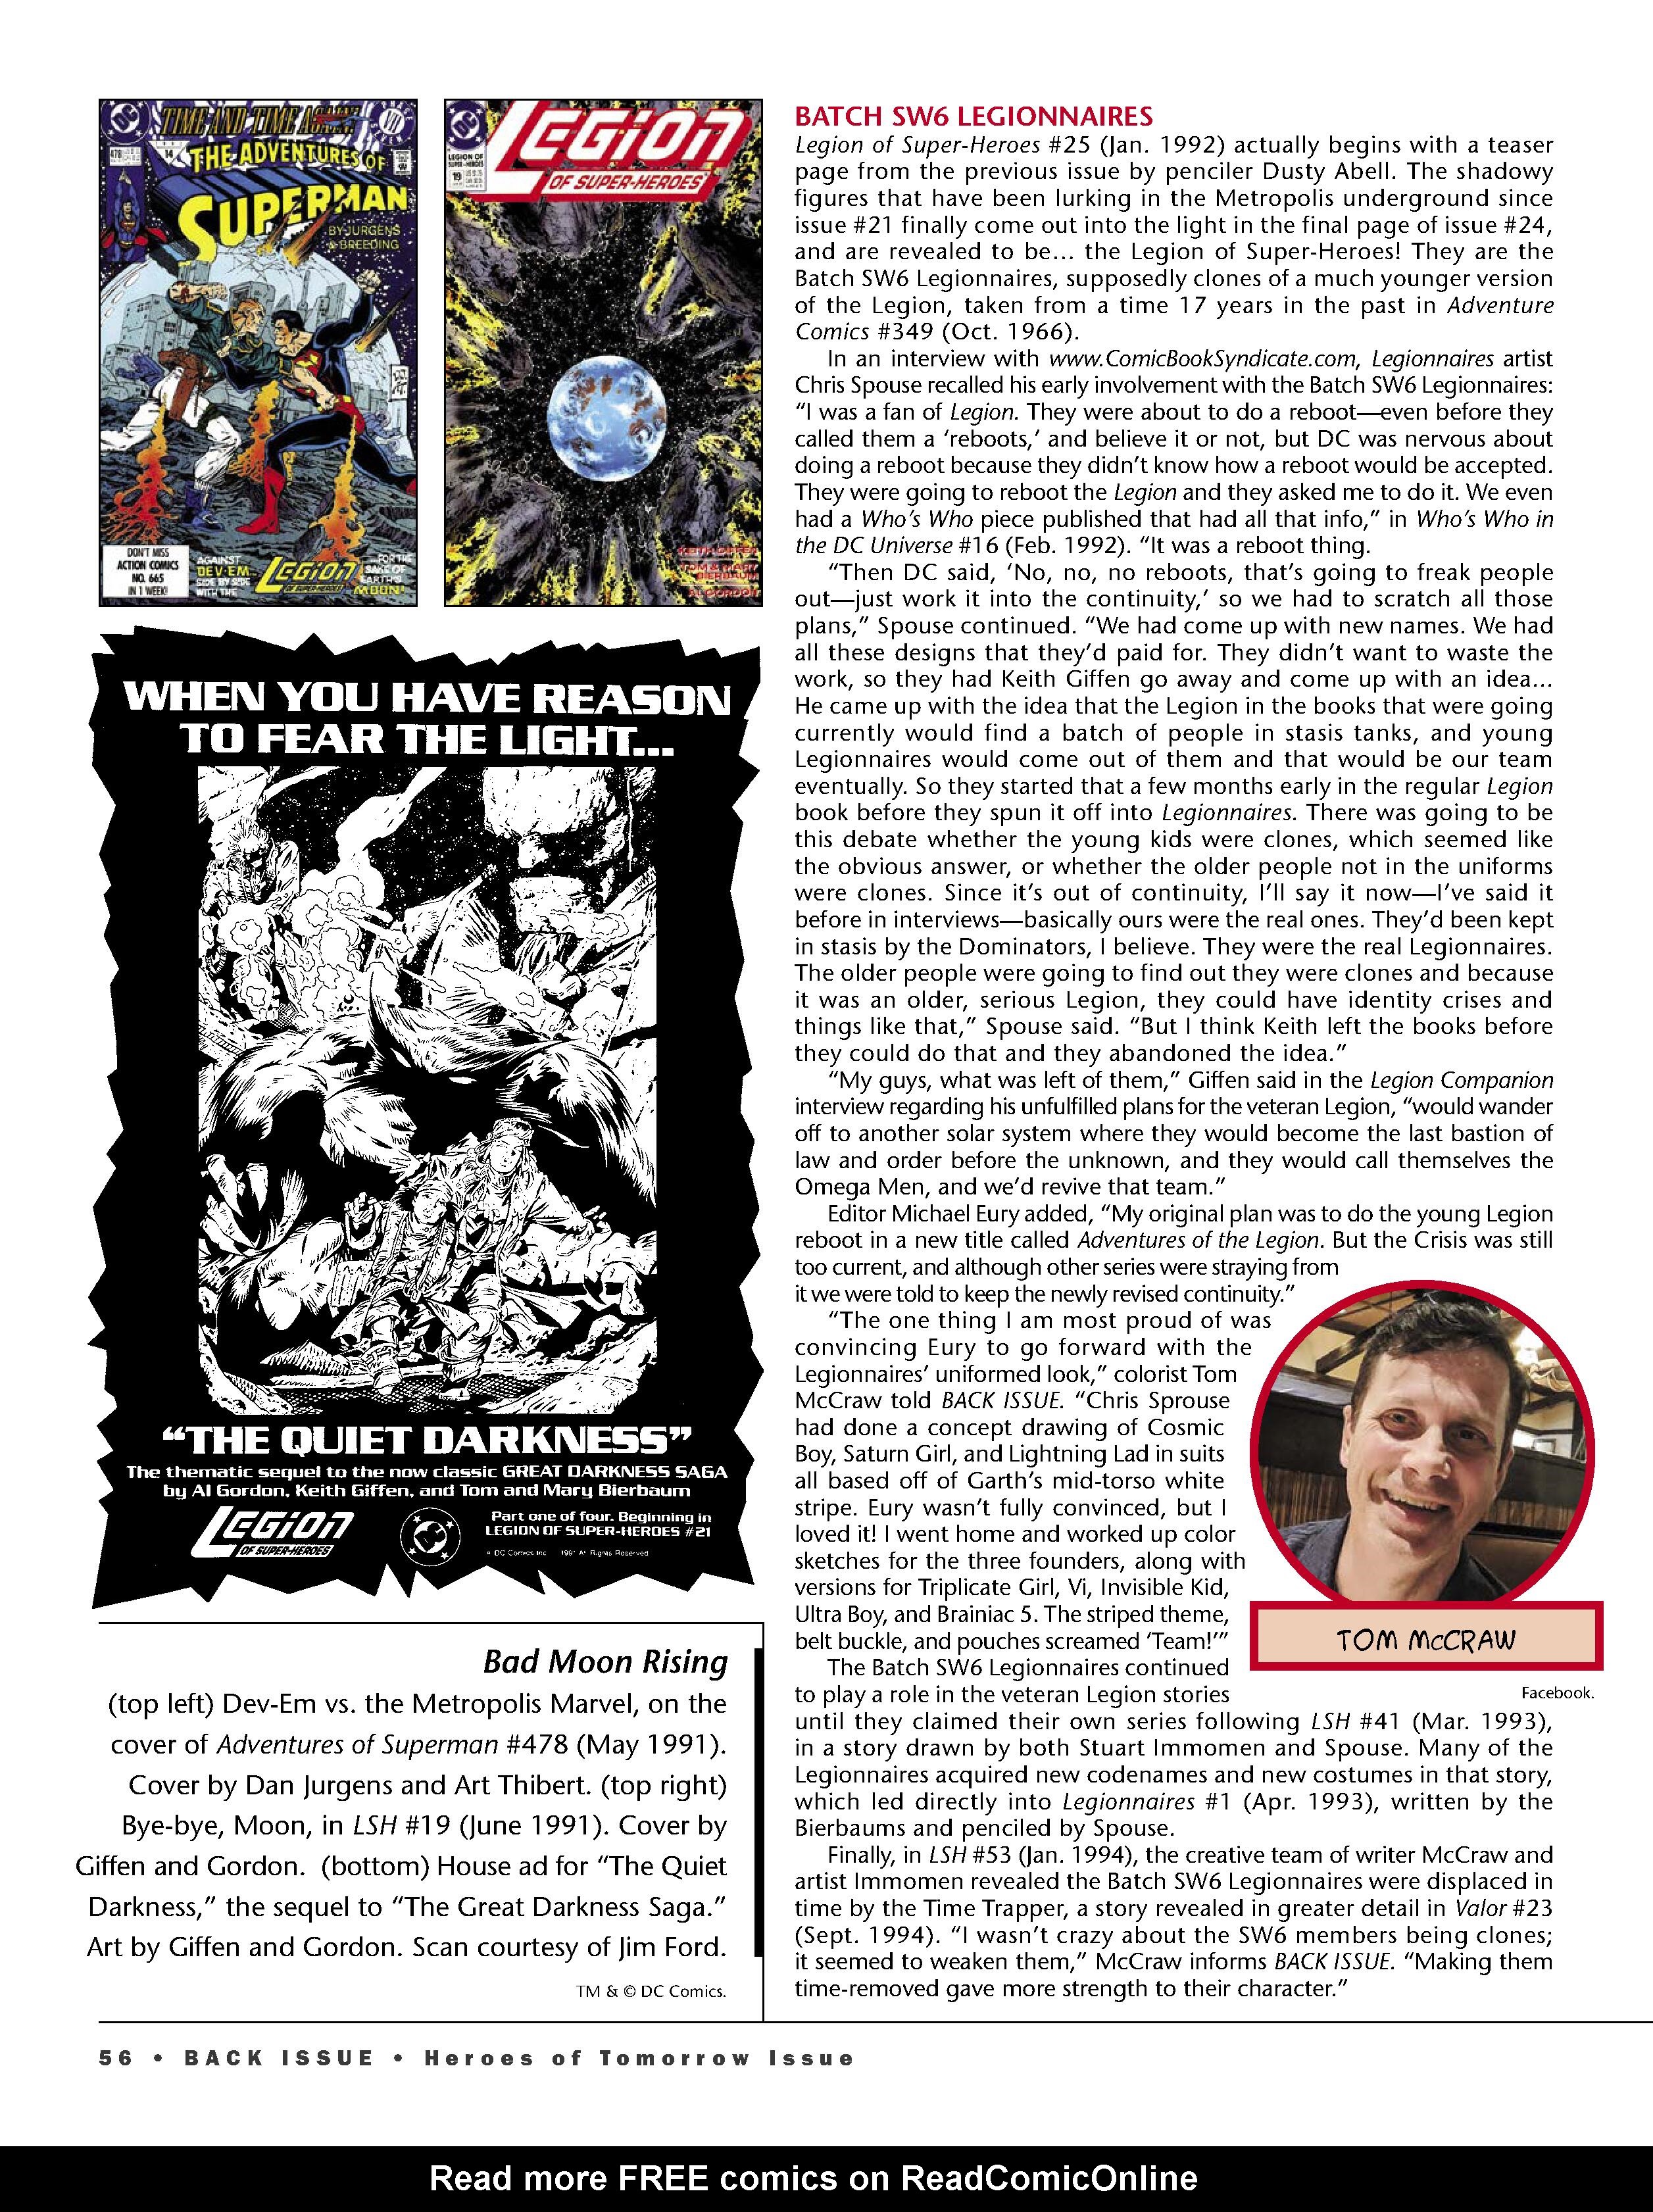 Read online Back Issue comic -  Issue #120 - 58